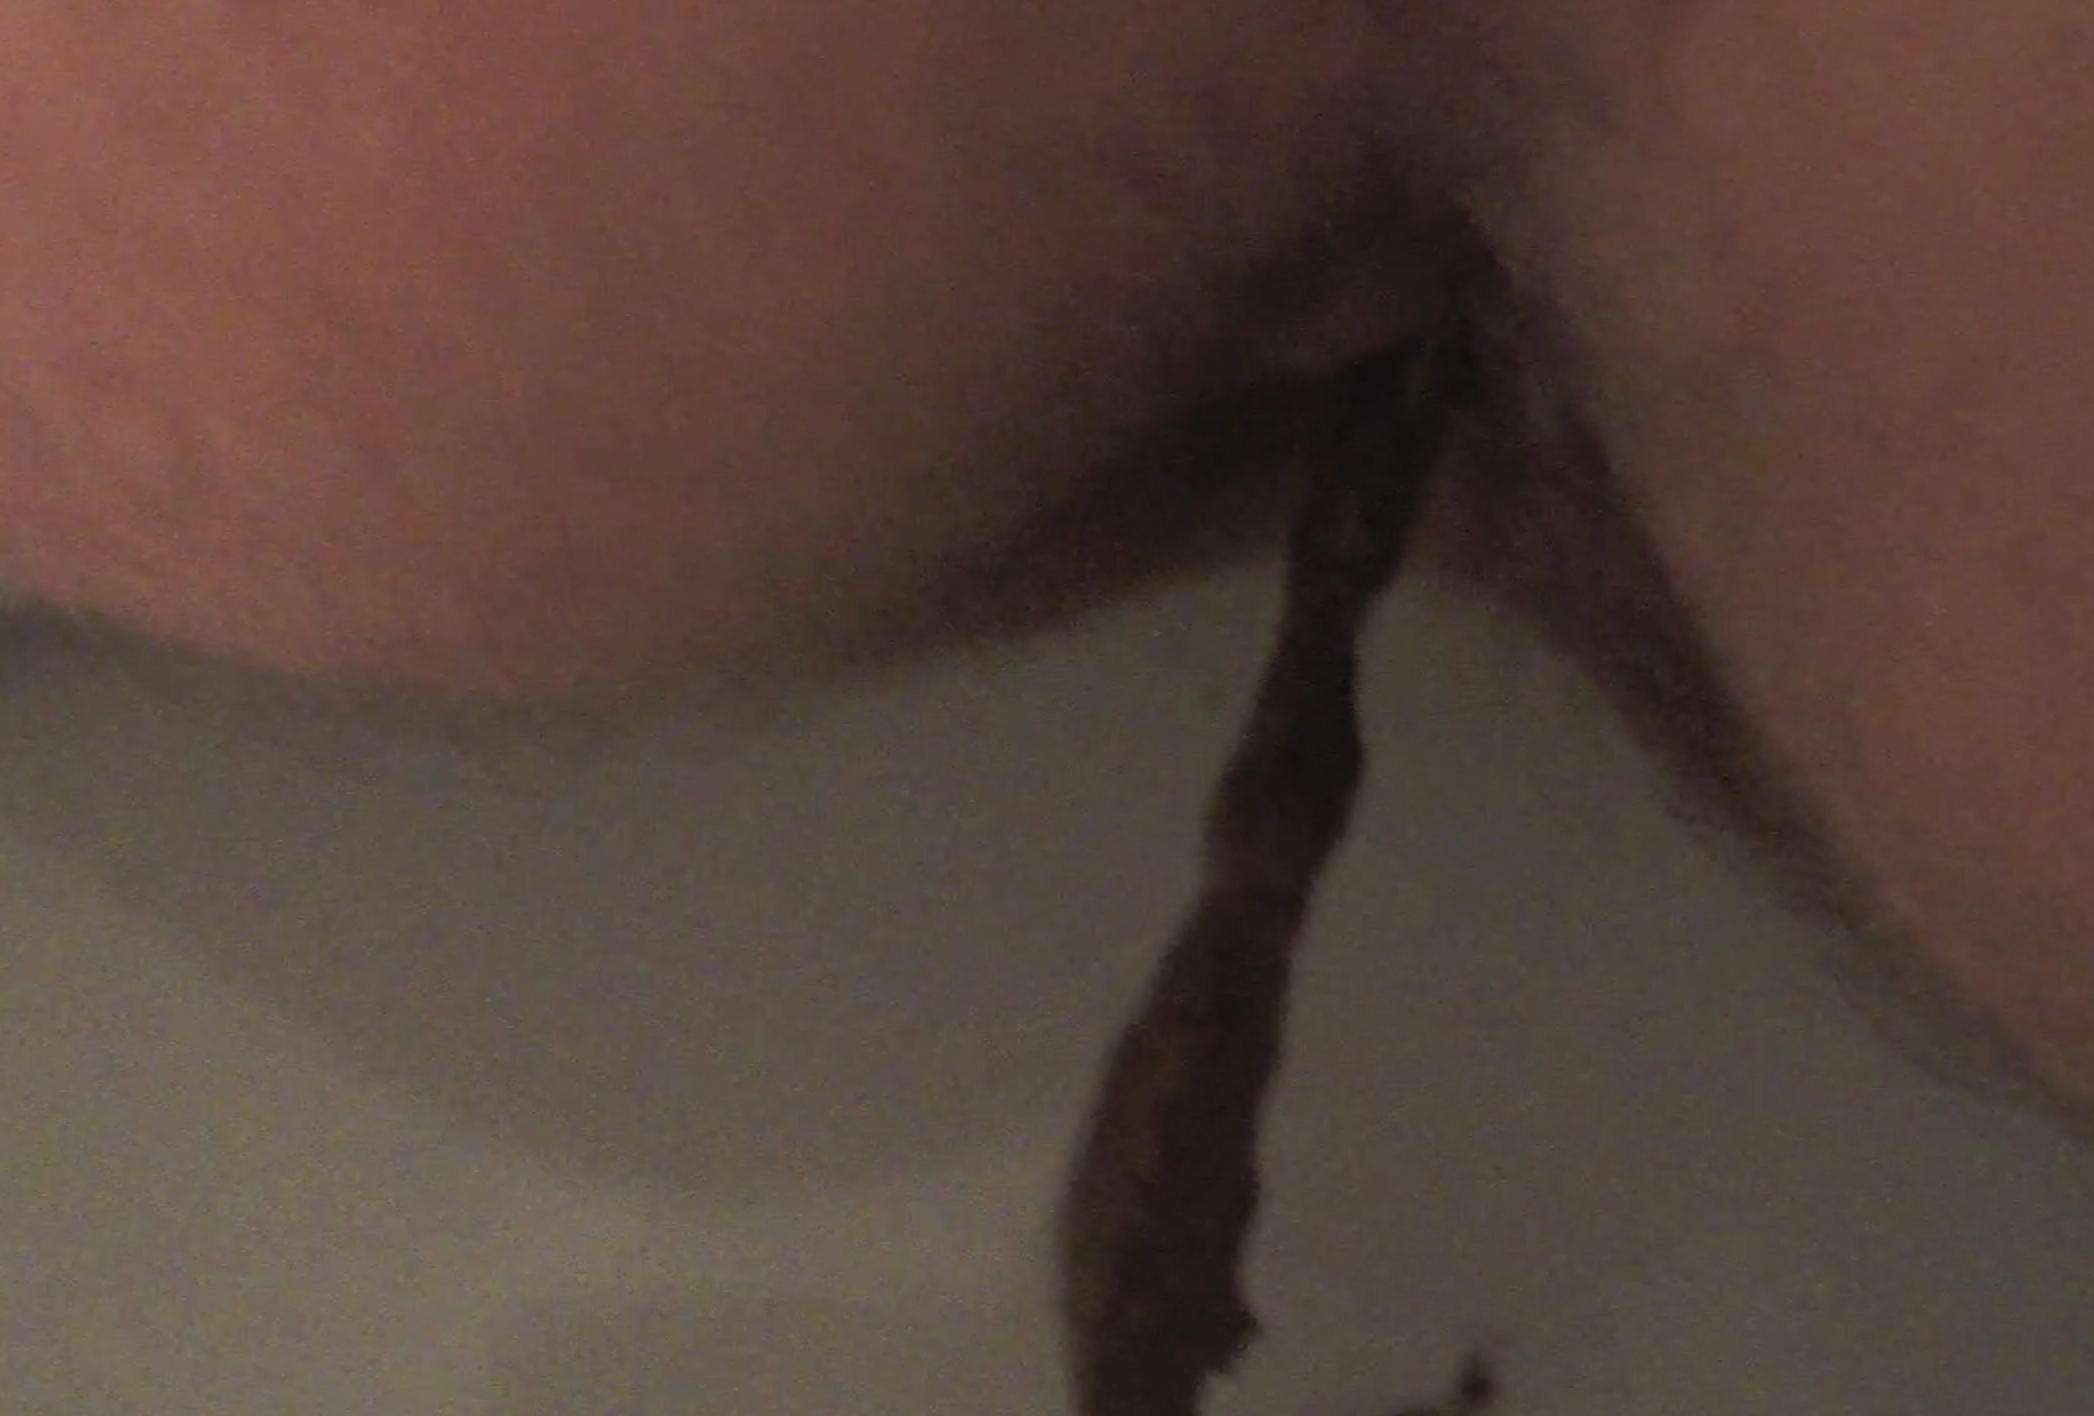 My sister poo in 2 toilets and I manage to catch her butthole on video